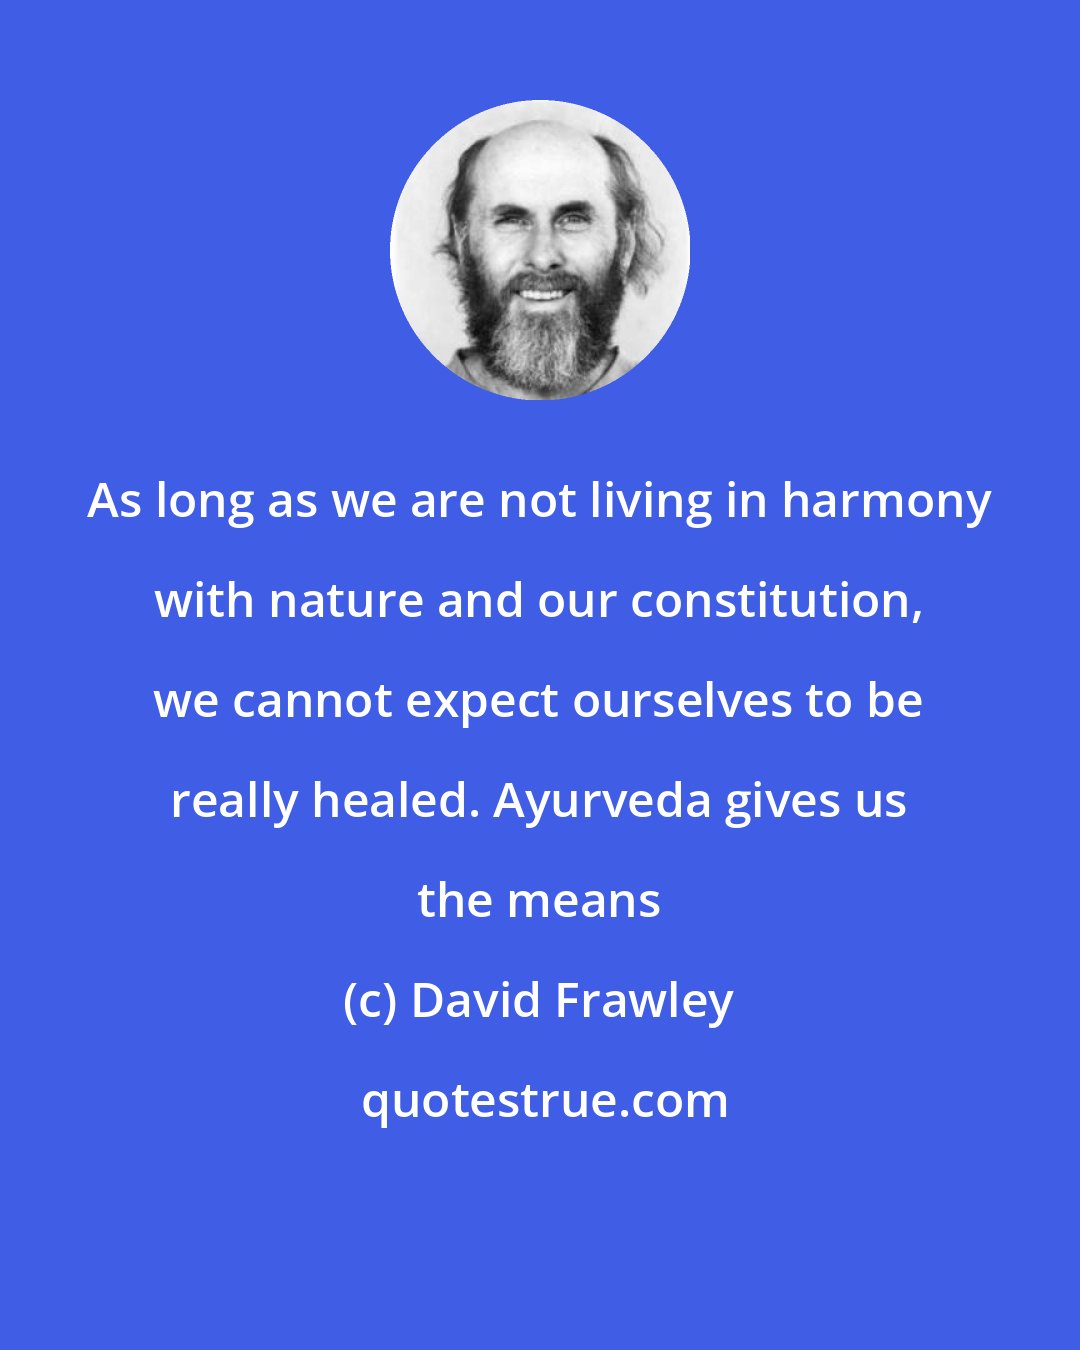 David Frawley: As long as we are not living in harmony with nature and our constitution, we cannot expect ourselves to be really healed. Ayurveda gives us the means